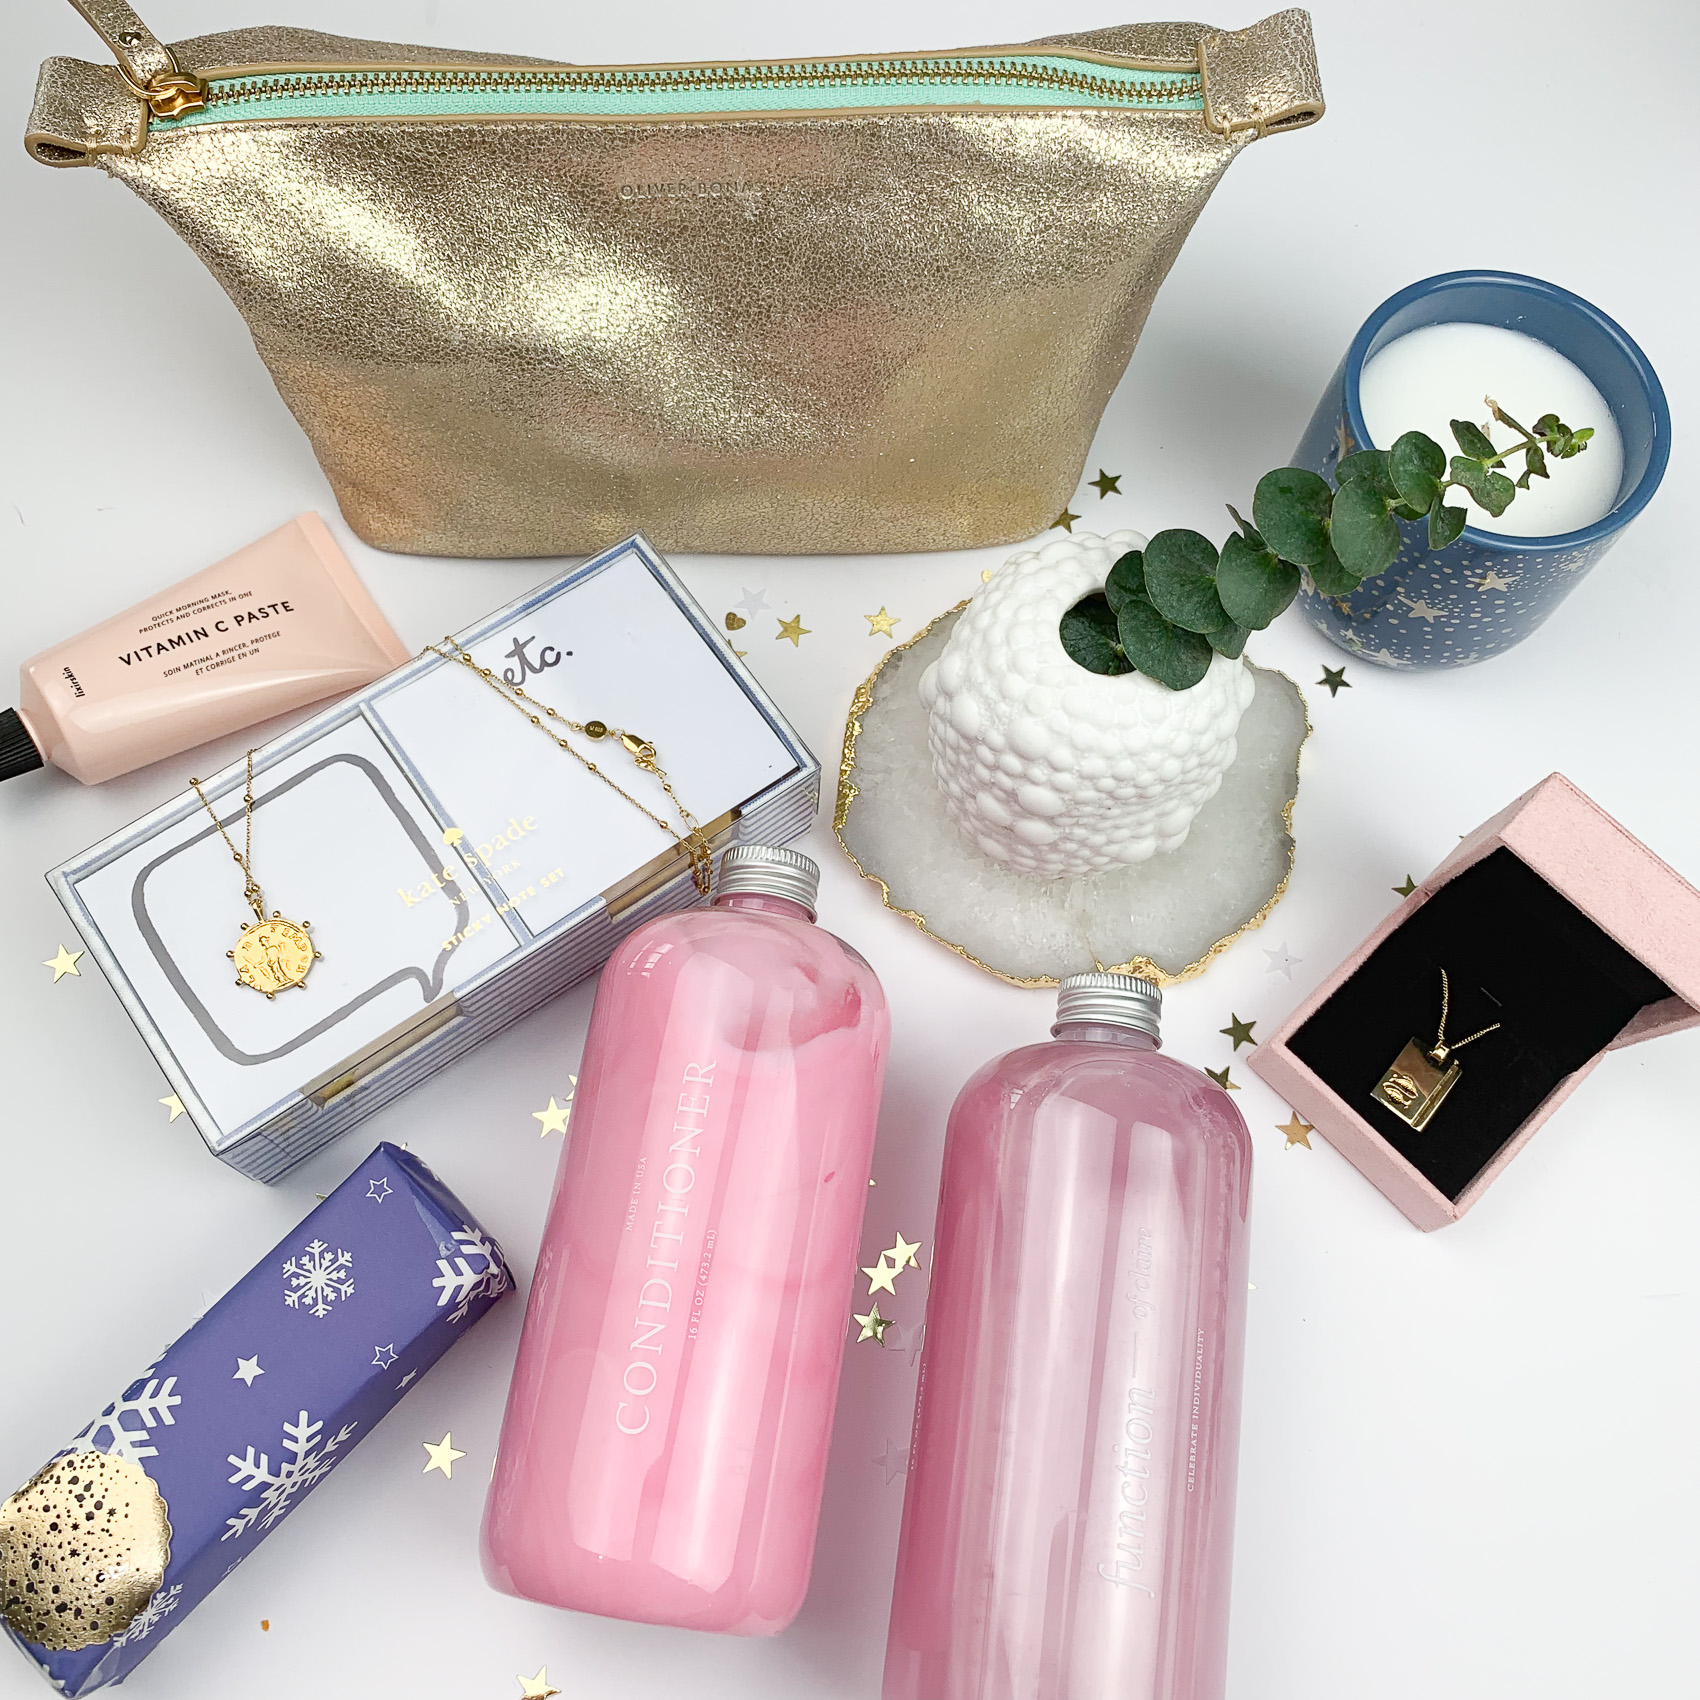 Function of beauty shampoo and conditioner, oliver bonsas cosmetic bag, oilver bonas candle, vitamin c paste, missoma necklace, Reliquia necklace